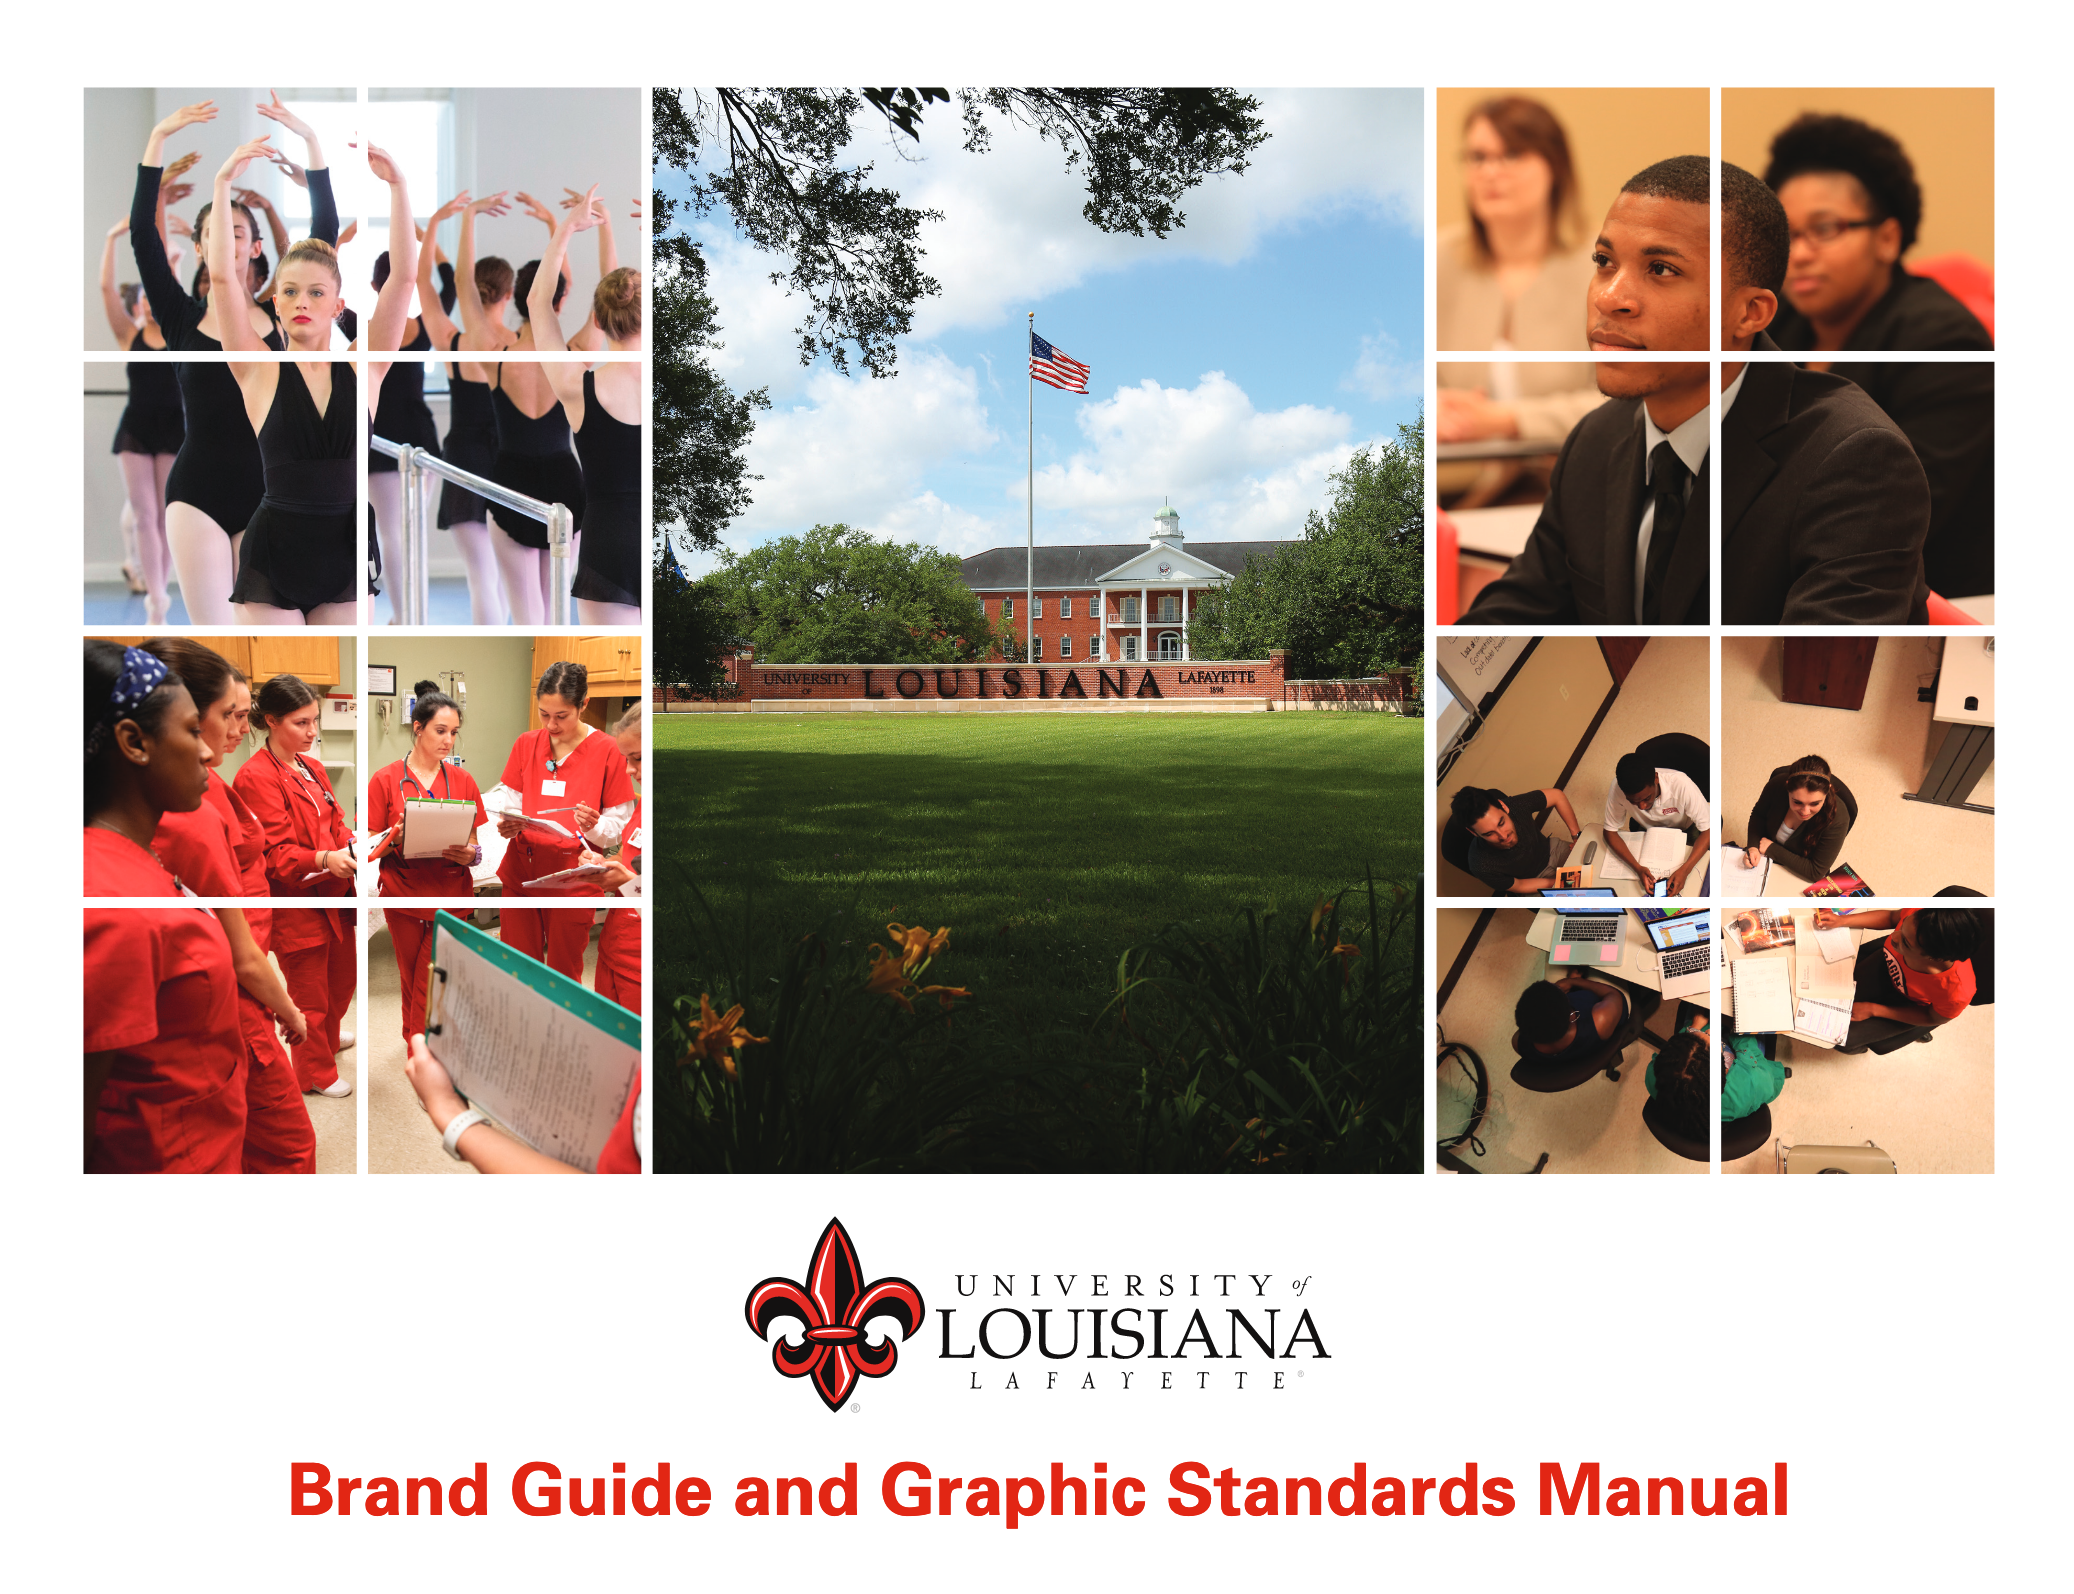 Cover of UL Lafayette's brand guide with photos of students and the words Brand Guide and Graphic Standards Manual